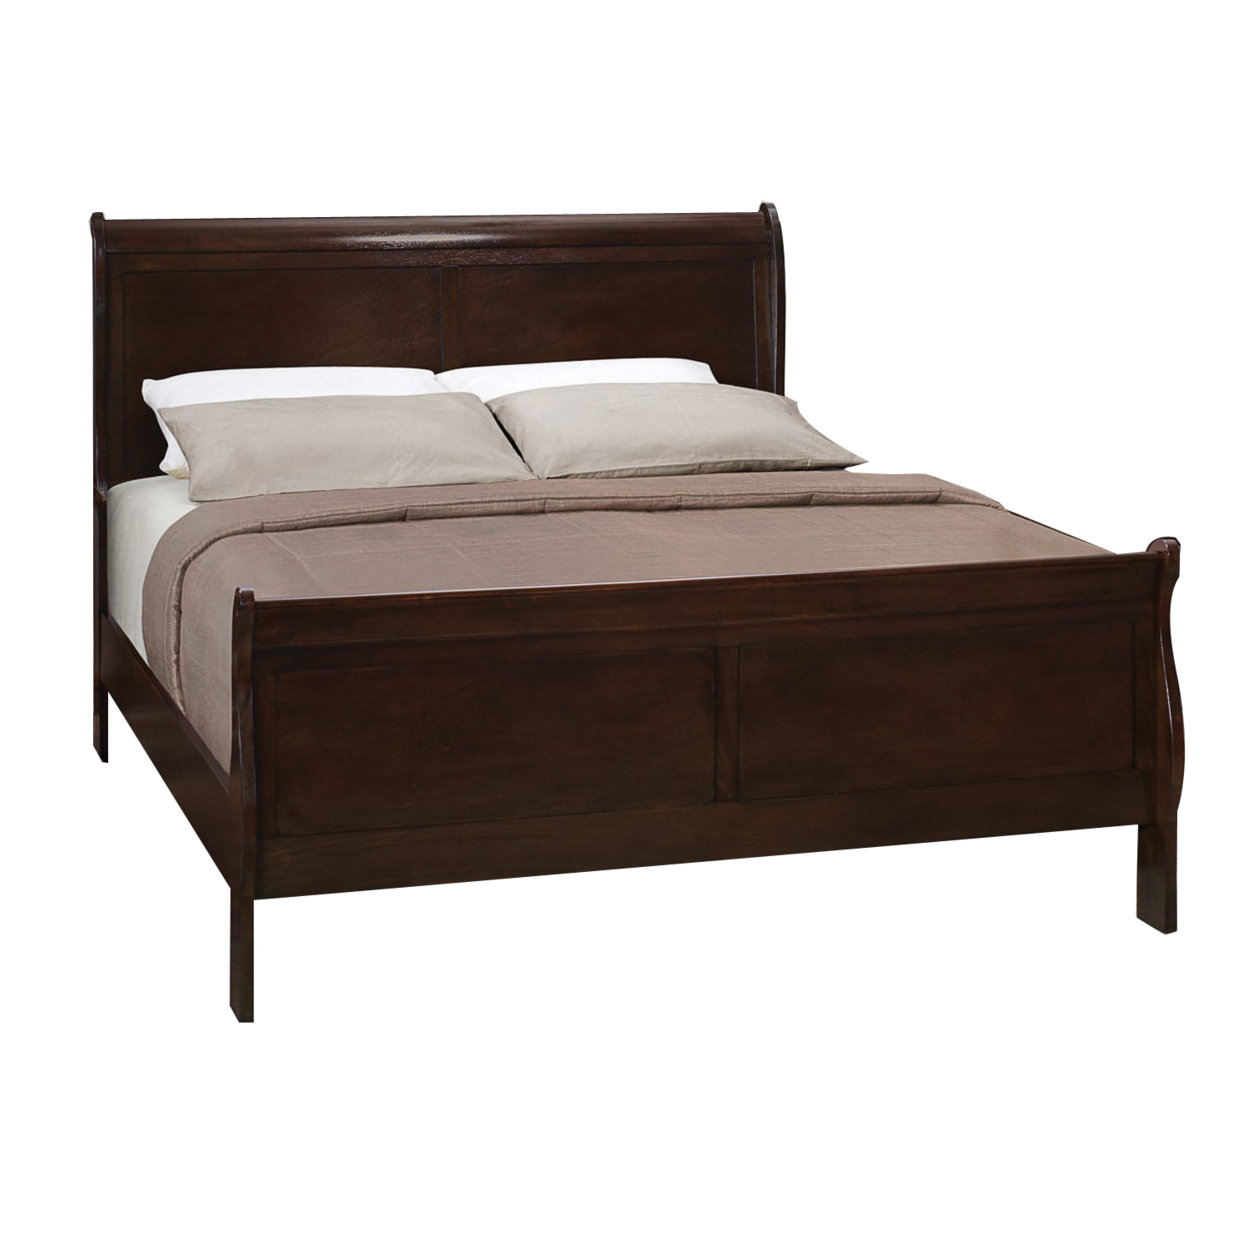 Traditional Style Wooden Queen Size Bed With Curved Headboard, Brown- Saltoro Sherpi